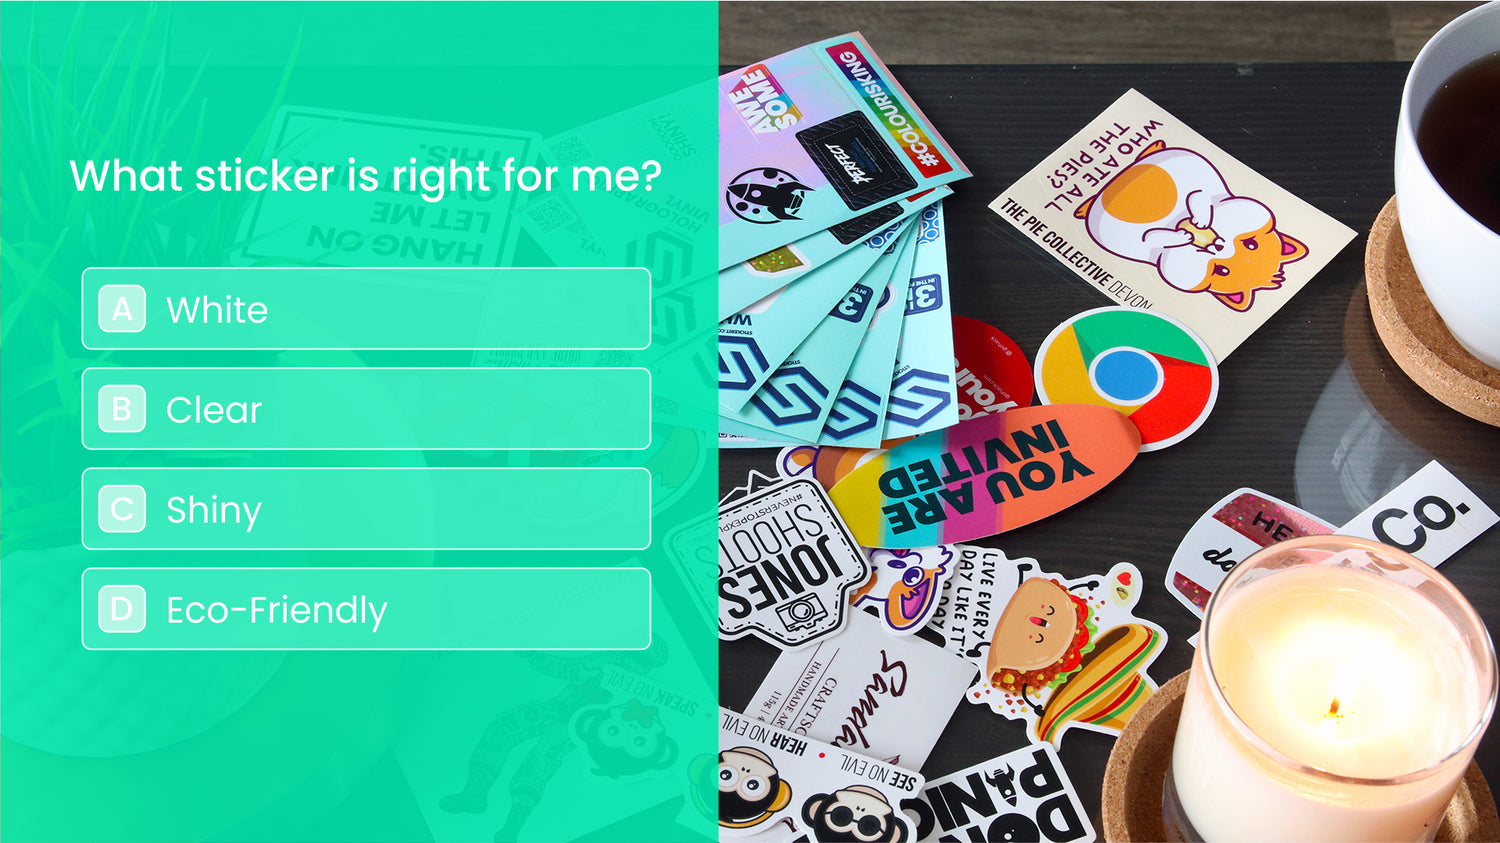 A question from Sticker it's instant assistant alongside piles of custom stickers on a table